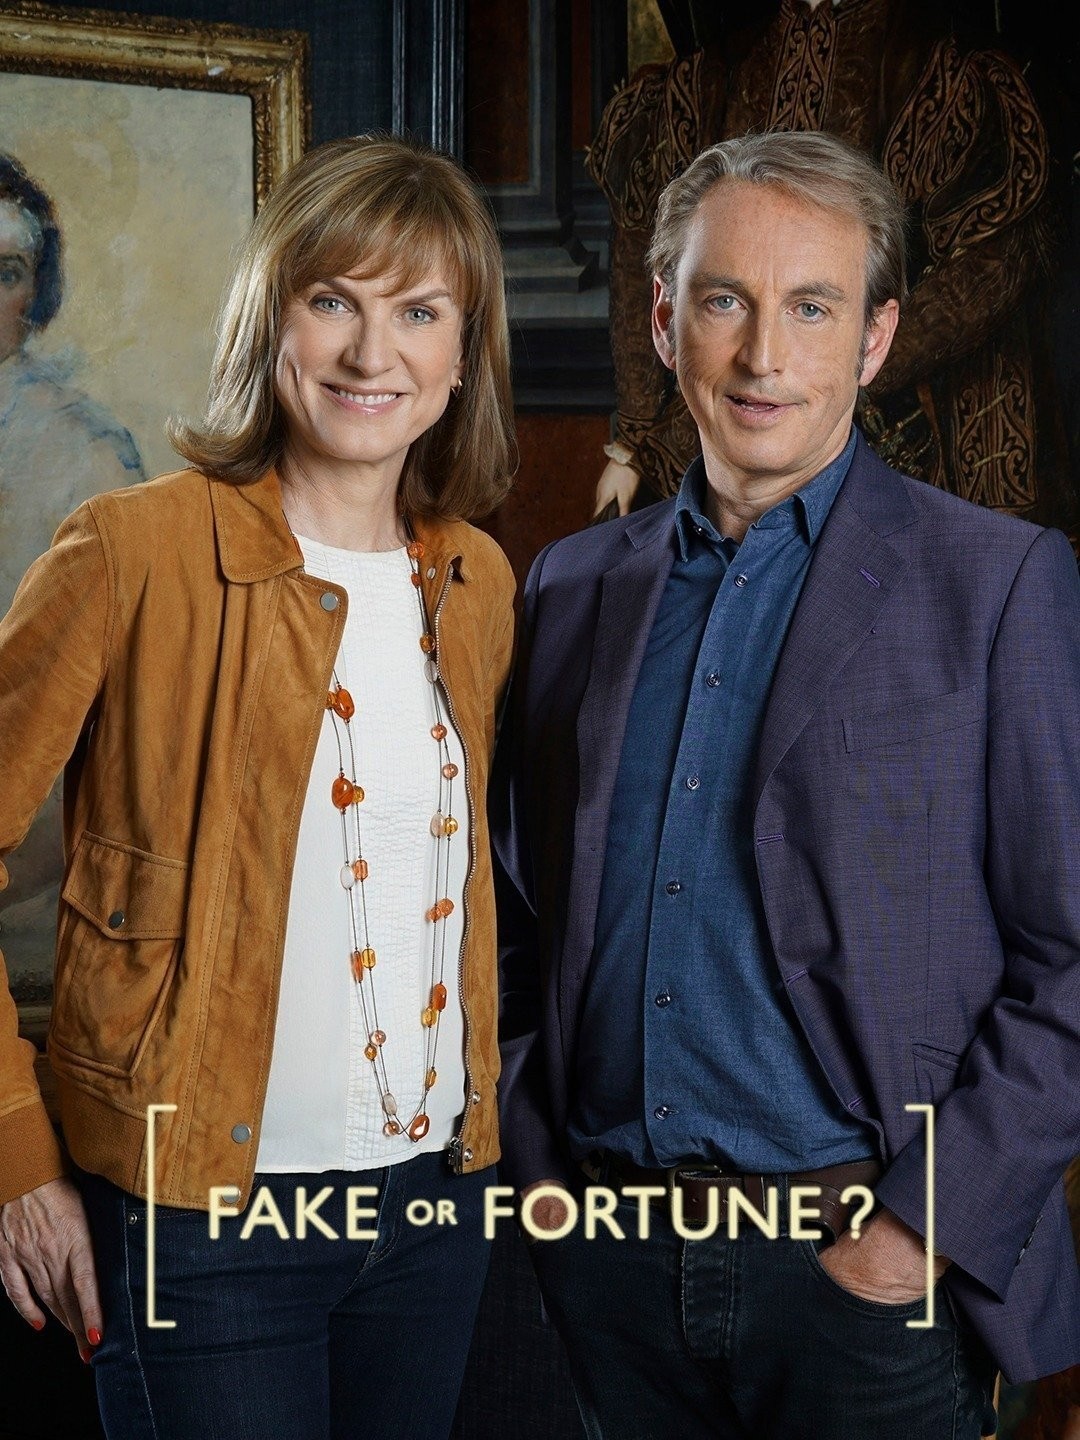 Why 'Fake or Fortune' is the only show left on traditional TV that